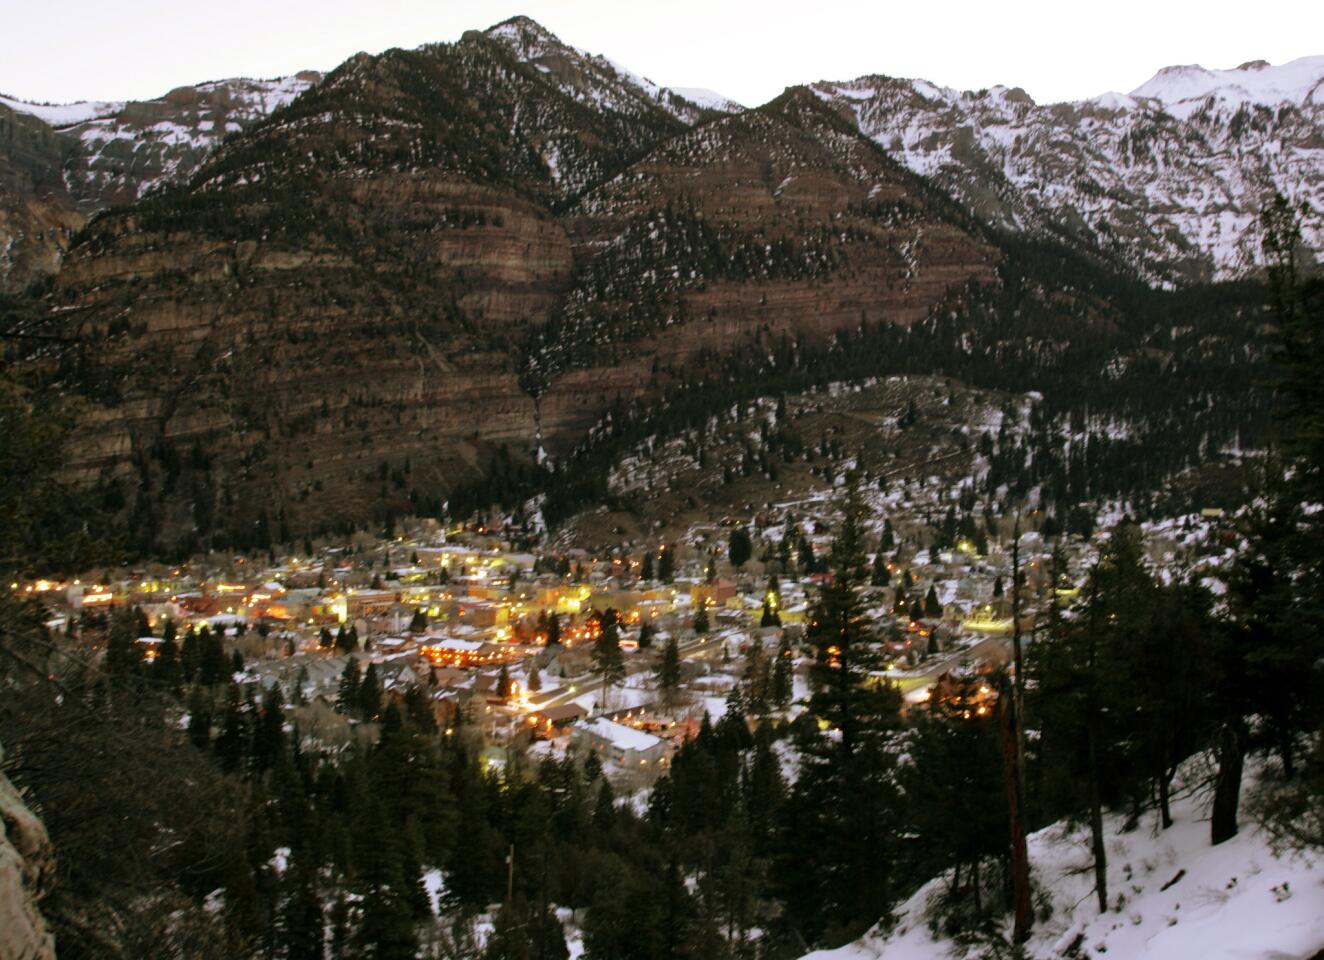 The Victorian-era Main Street is a National Historic District lined with restored storefronts. Looming above, the cliff-like peaks from the San Juan range surround the town on three sides and harbor the best winter ice-climbing routes in the country.